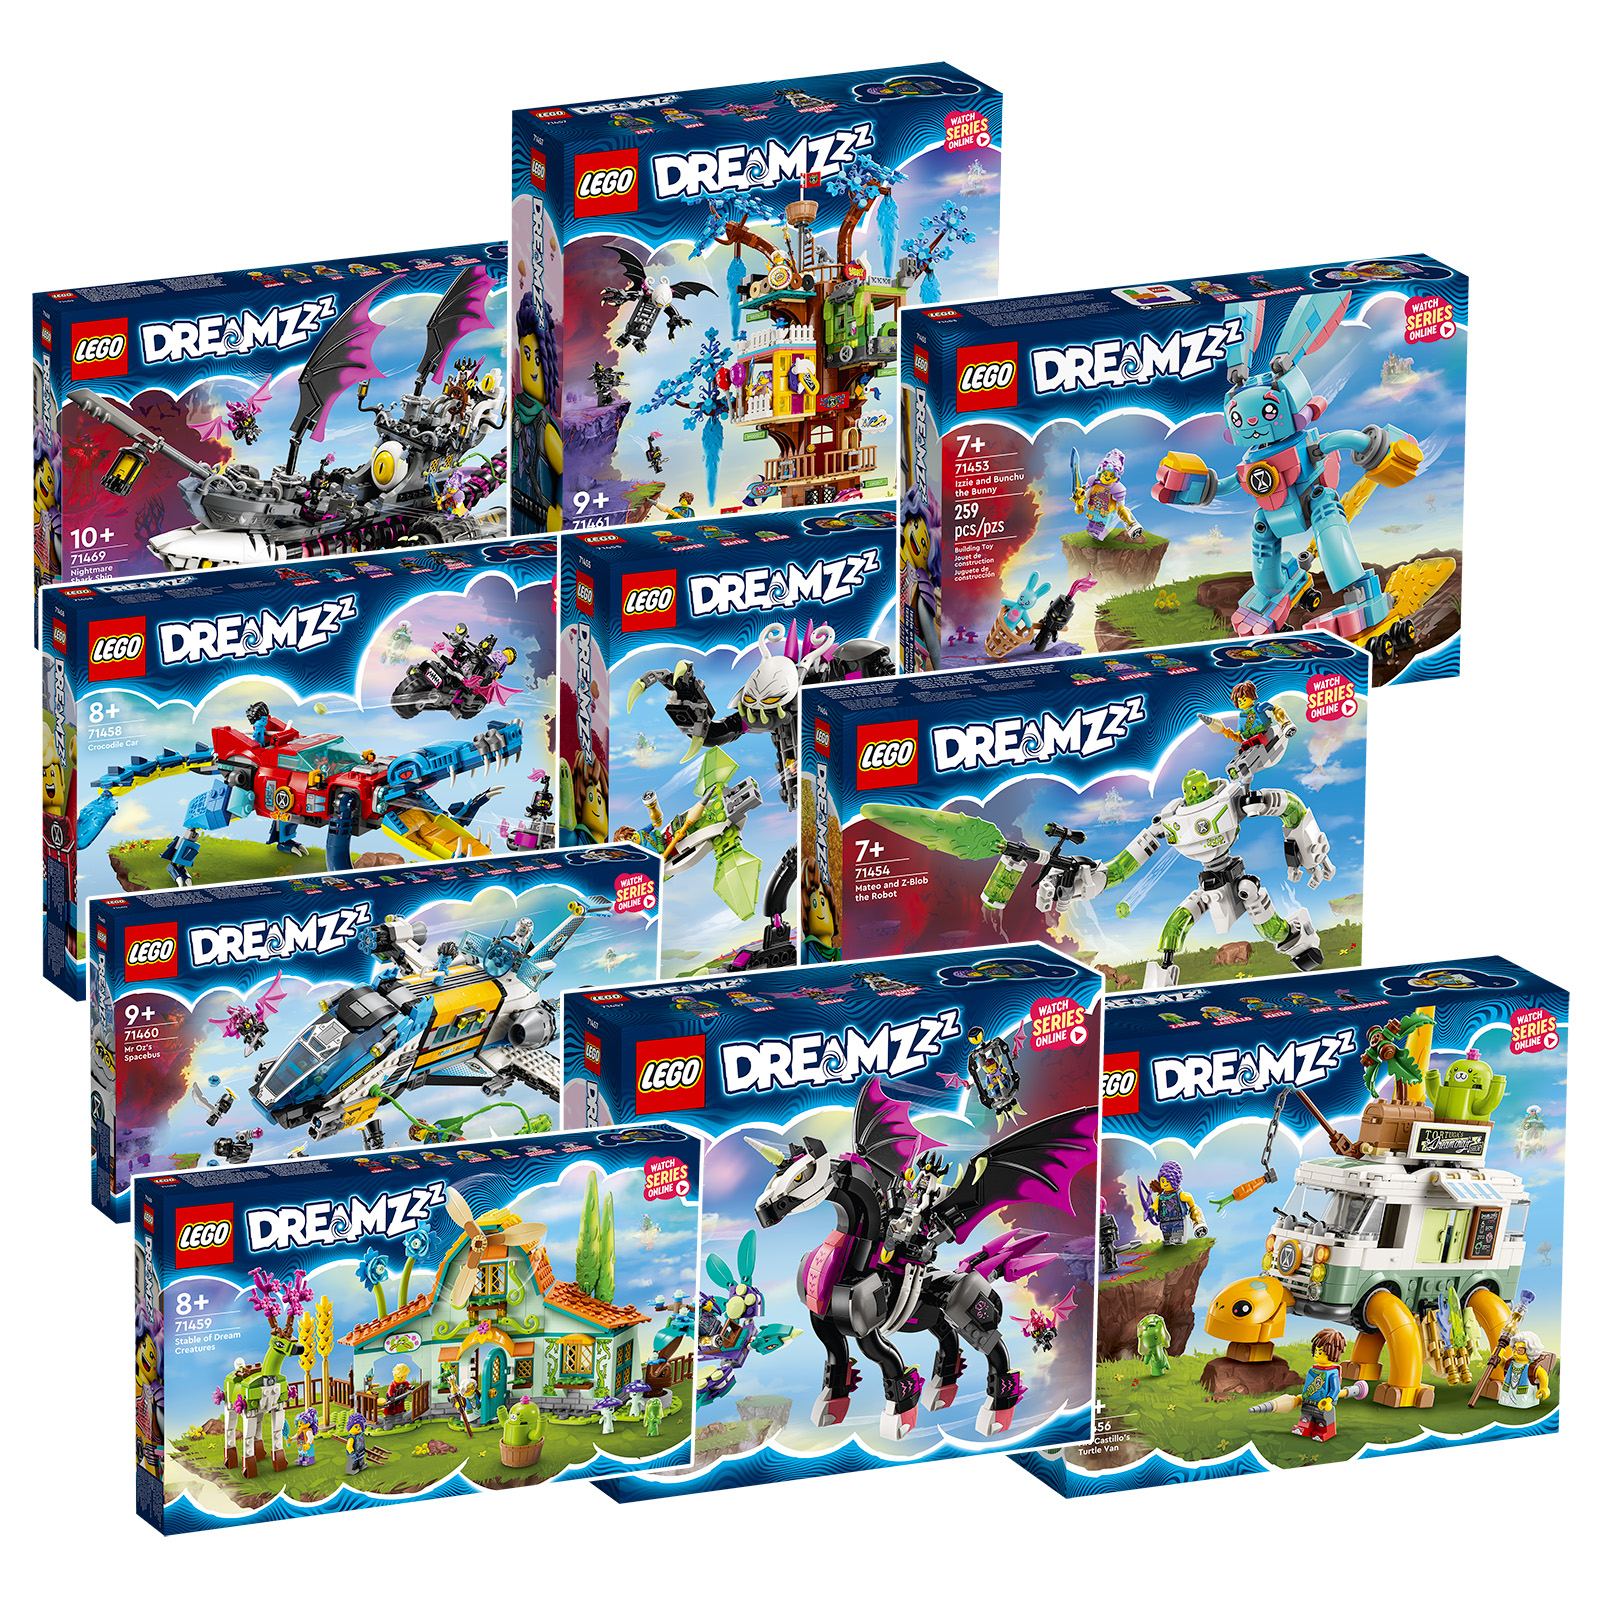 ▻ New LEGO DREAMZzz 2023: sets are available for pre-order on the